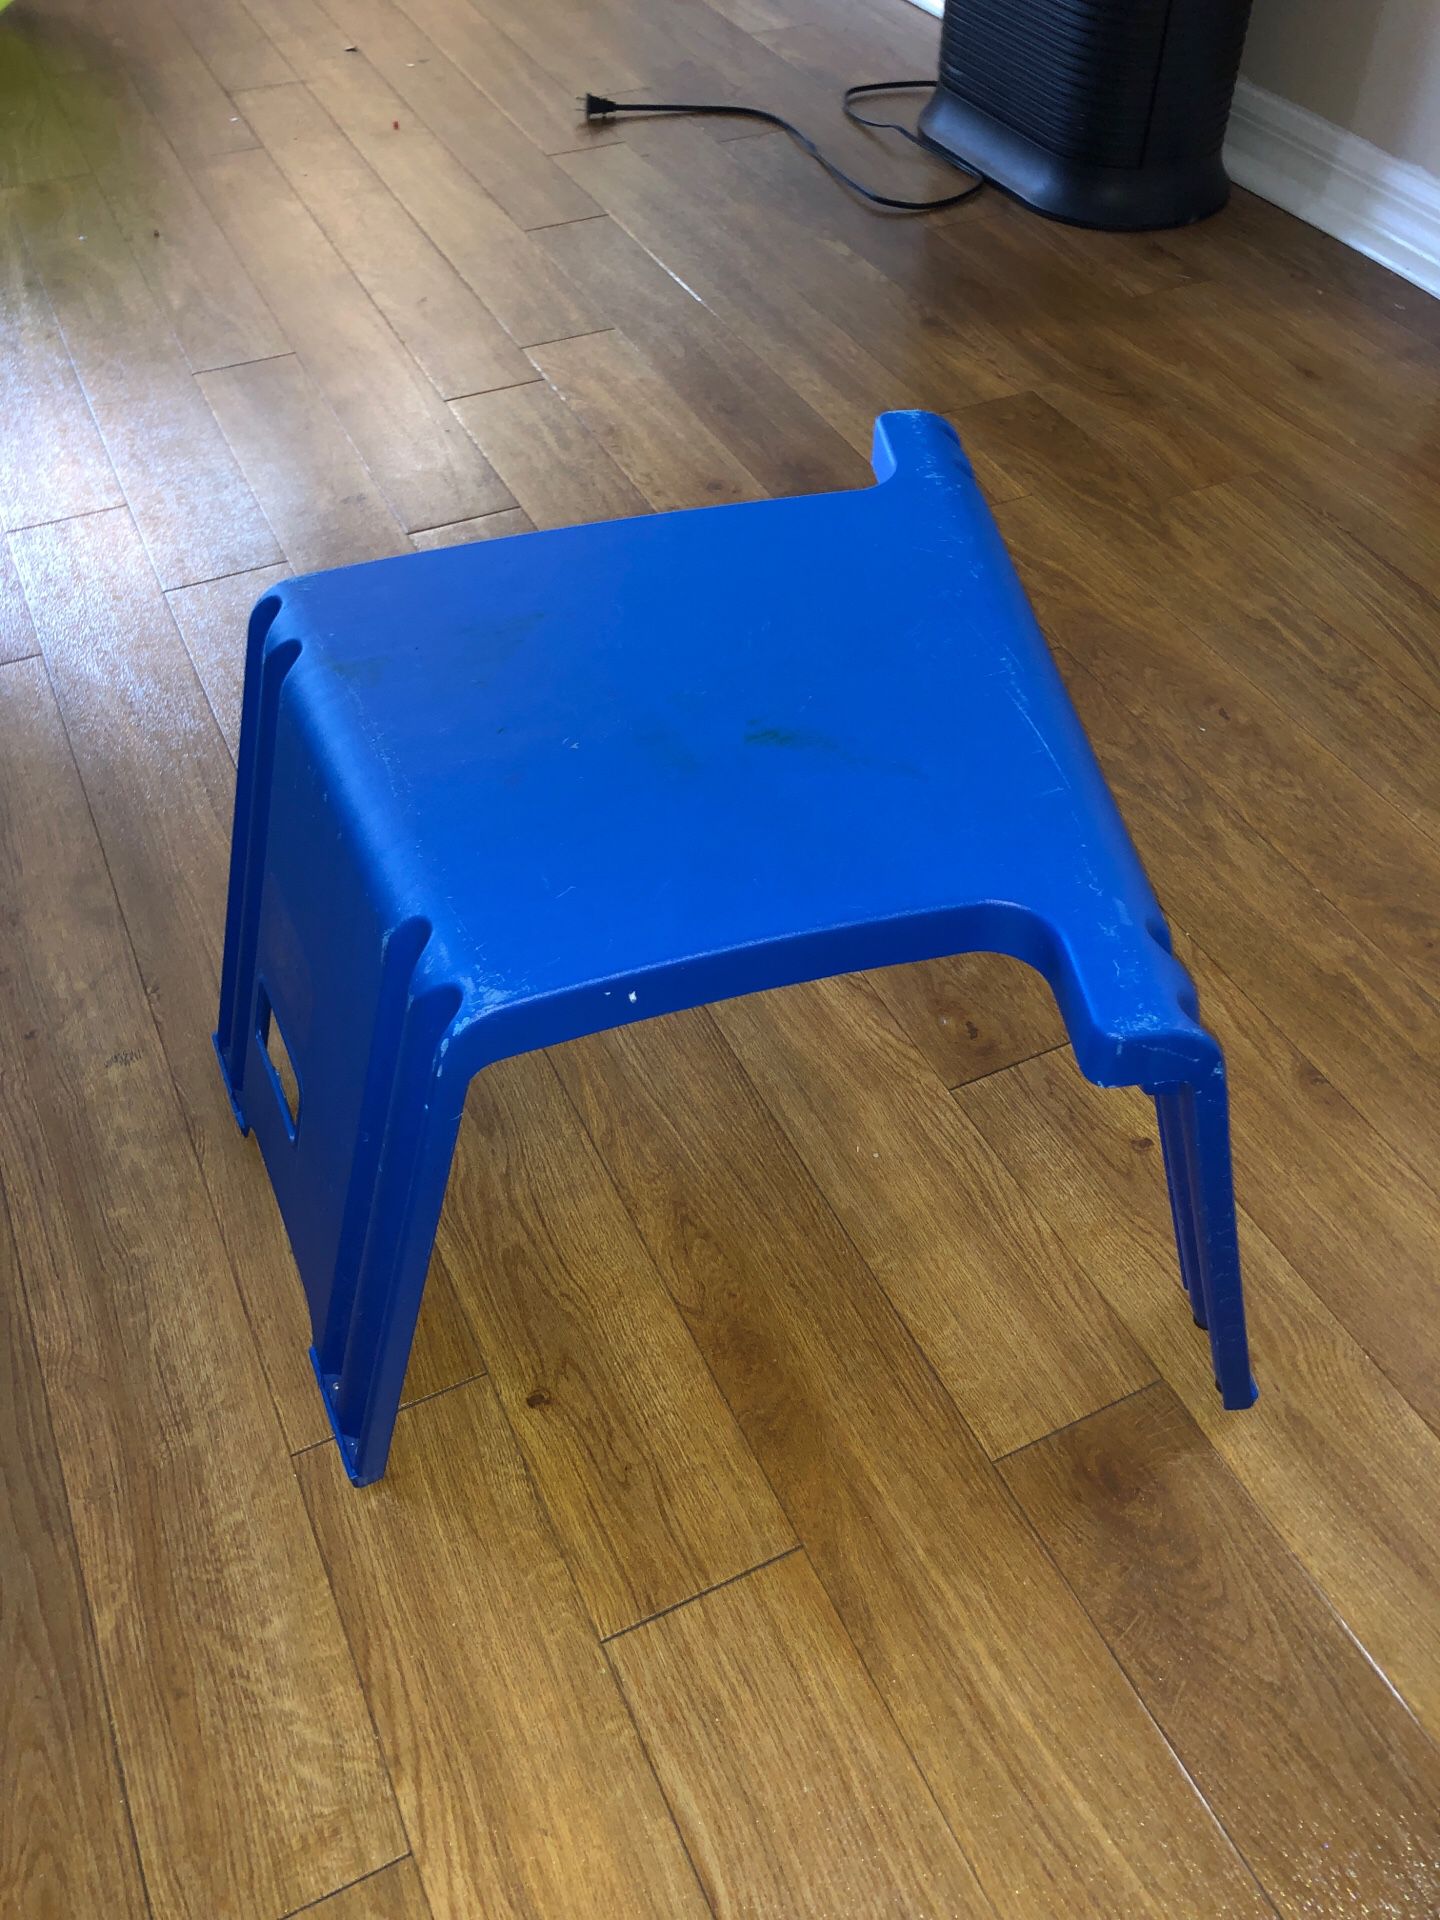 Stool for child. Schools. Student chair. Desk for kid. Hard plastic. Industrial grade. Perfect conditions.